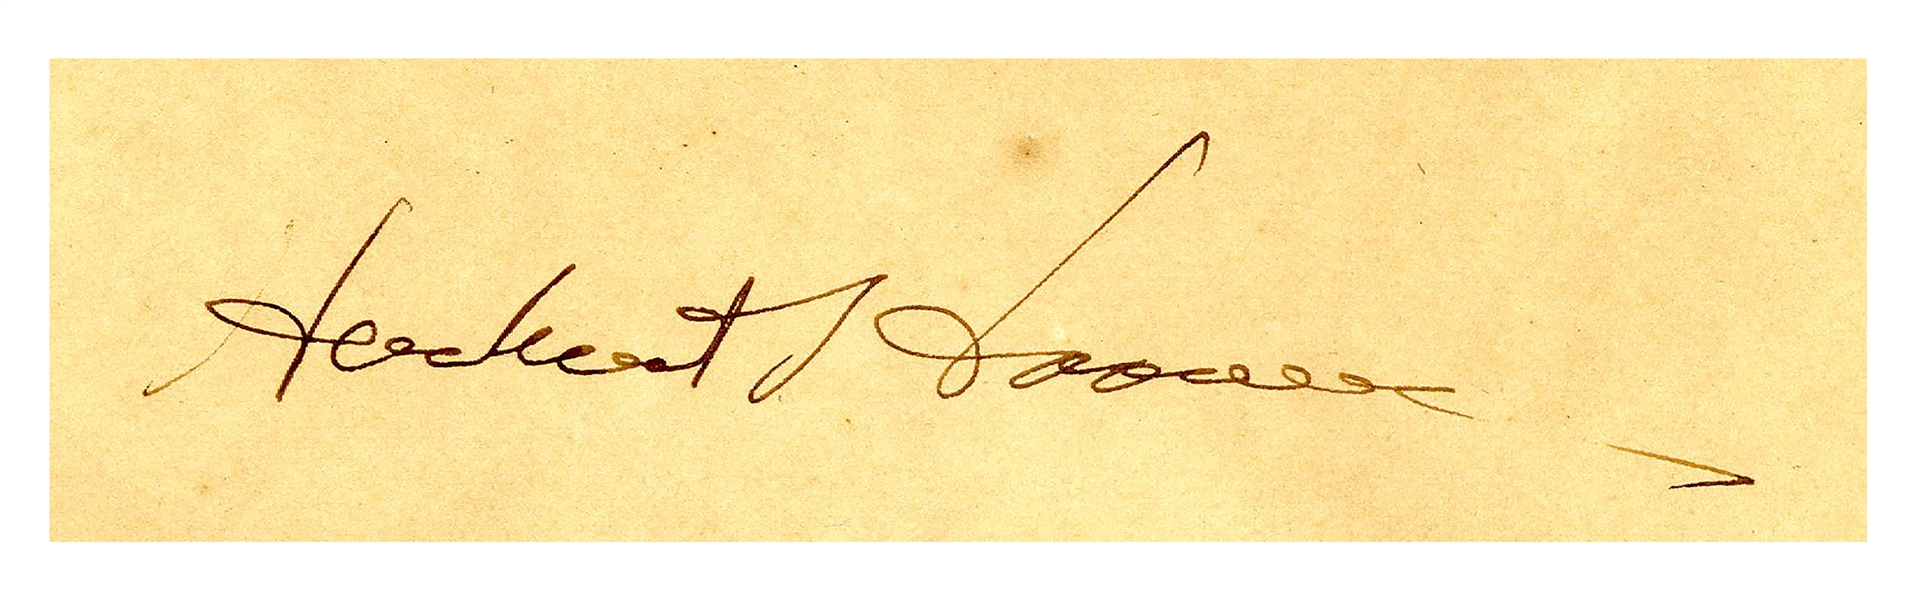 President Herbert Hoover Signed Cabinet Appointment for His Labor Secretary, William Doak -- A Very Rare Signed Presidential Cabinet Appointment